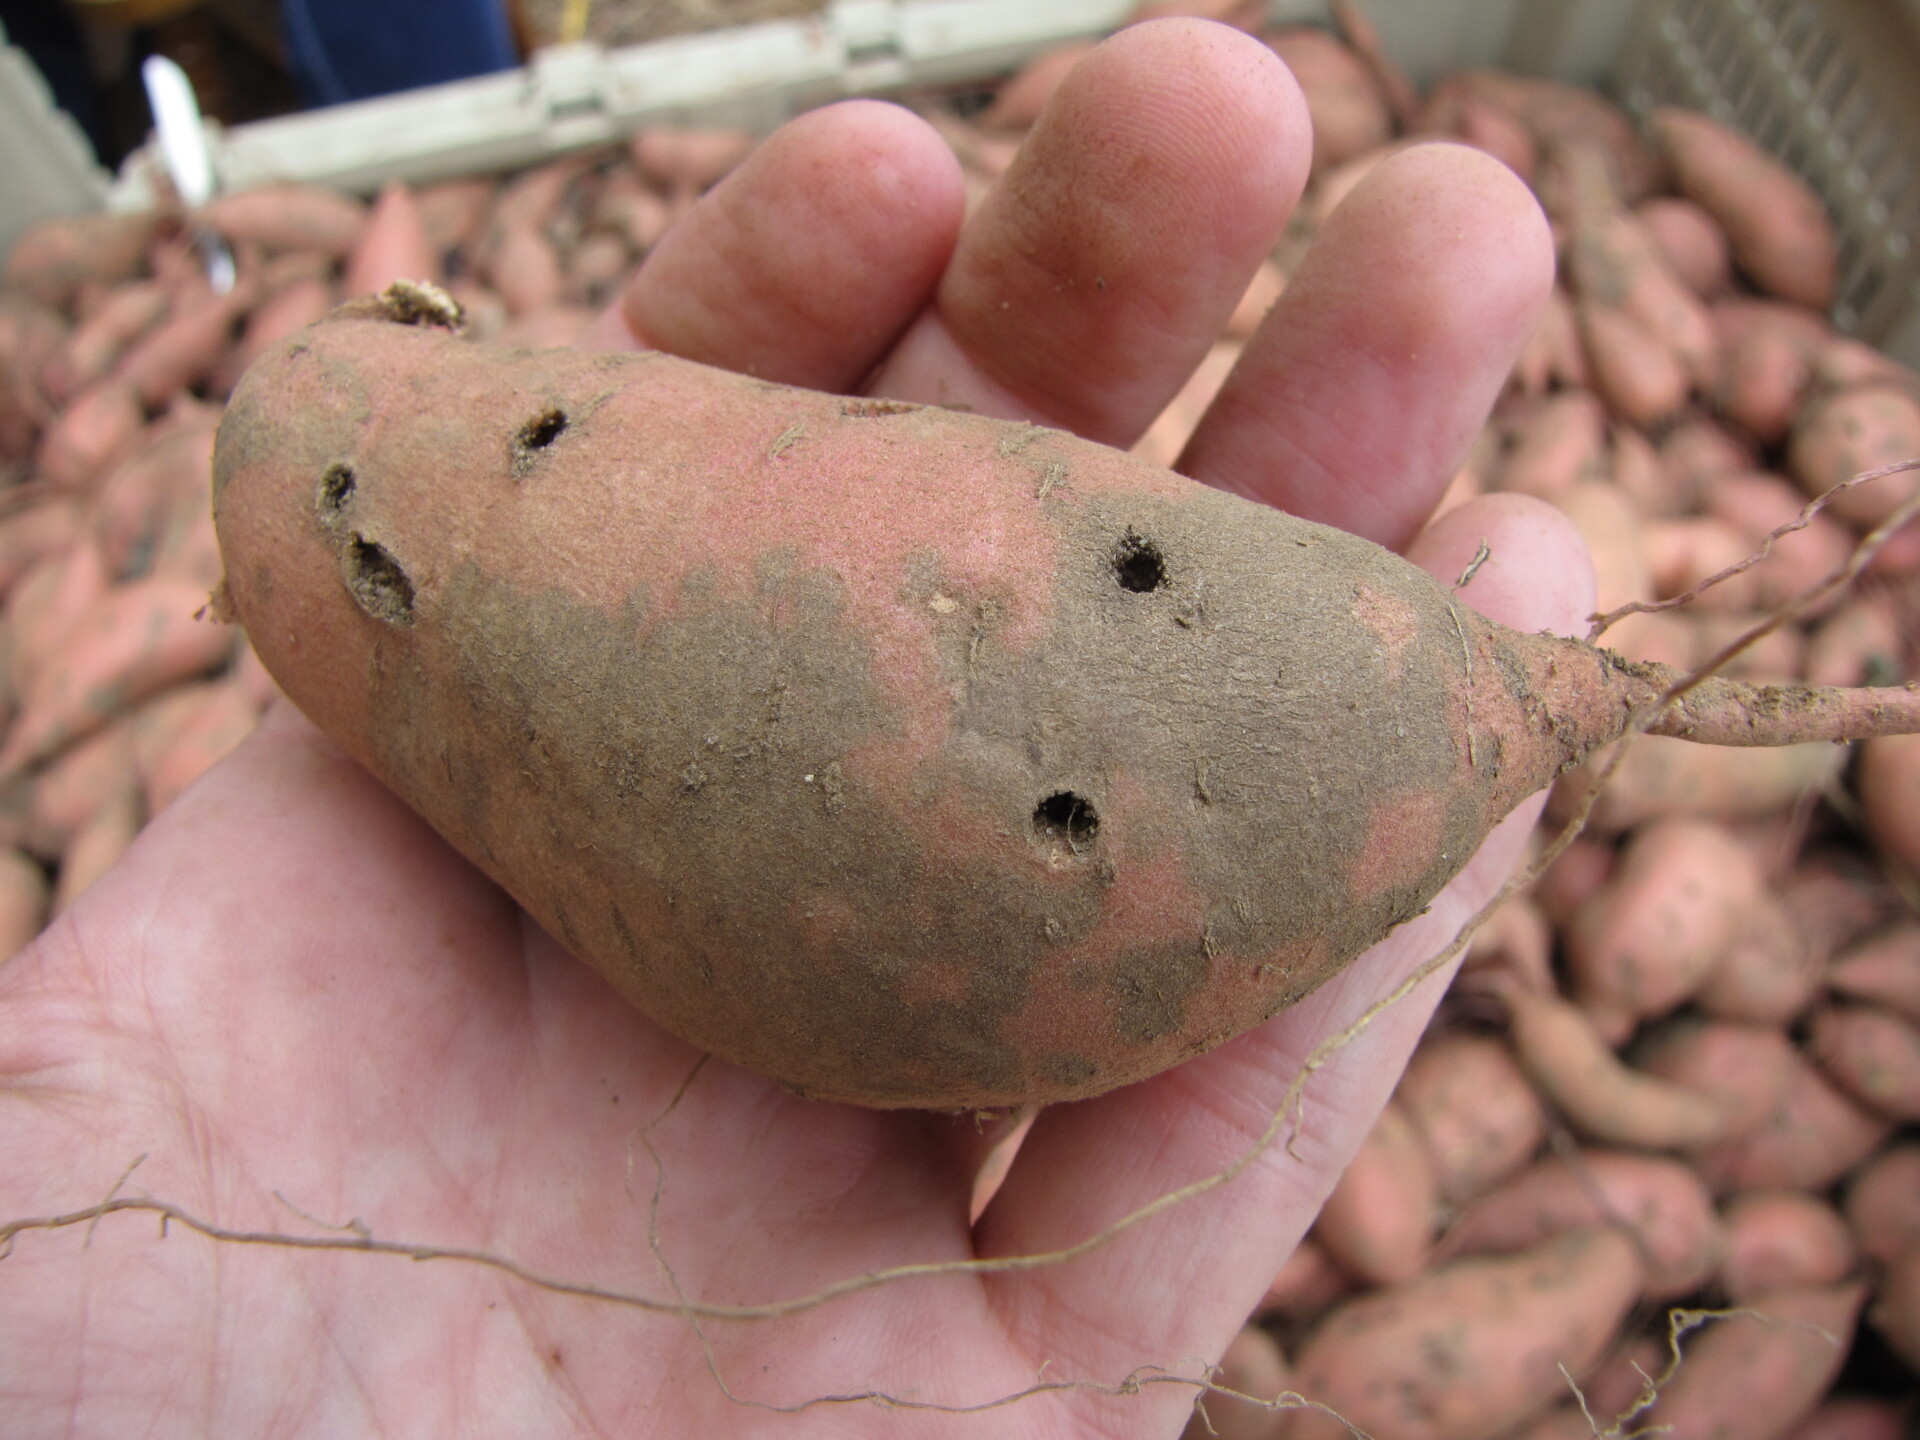 Figure 1. Scurf of sweet potato. Note gray, brown stain on surface. Holes are not necessarily a symptom of scurf.